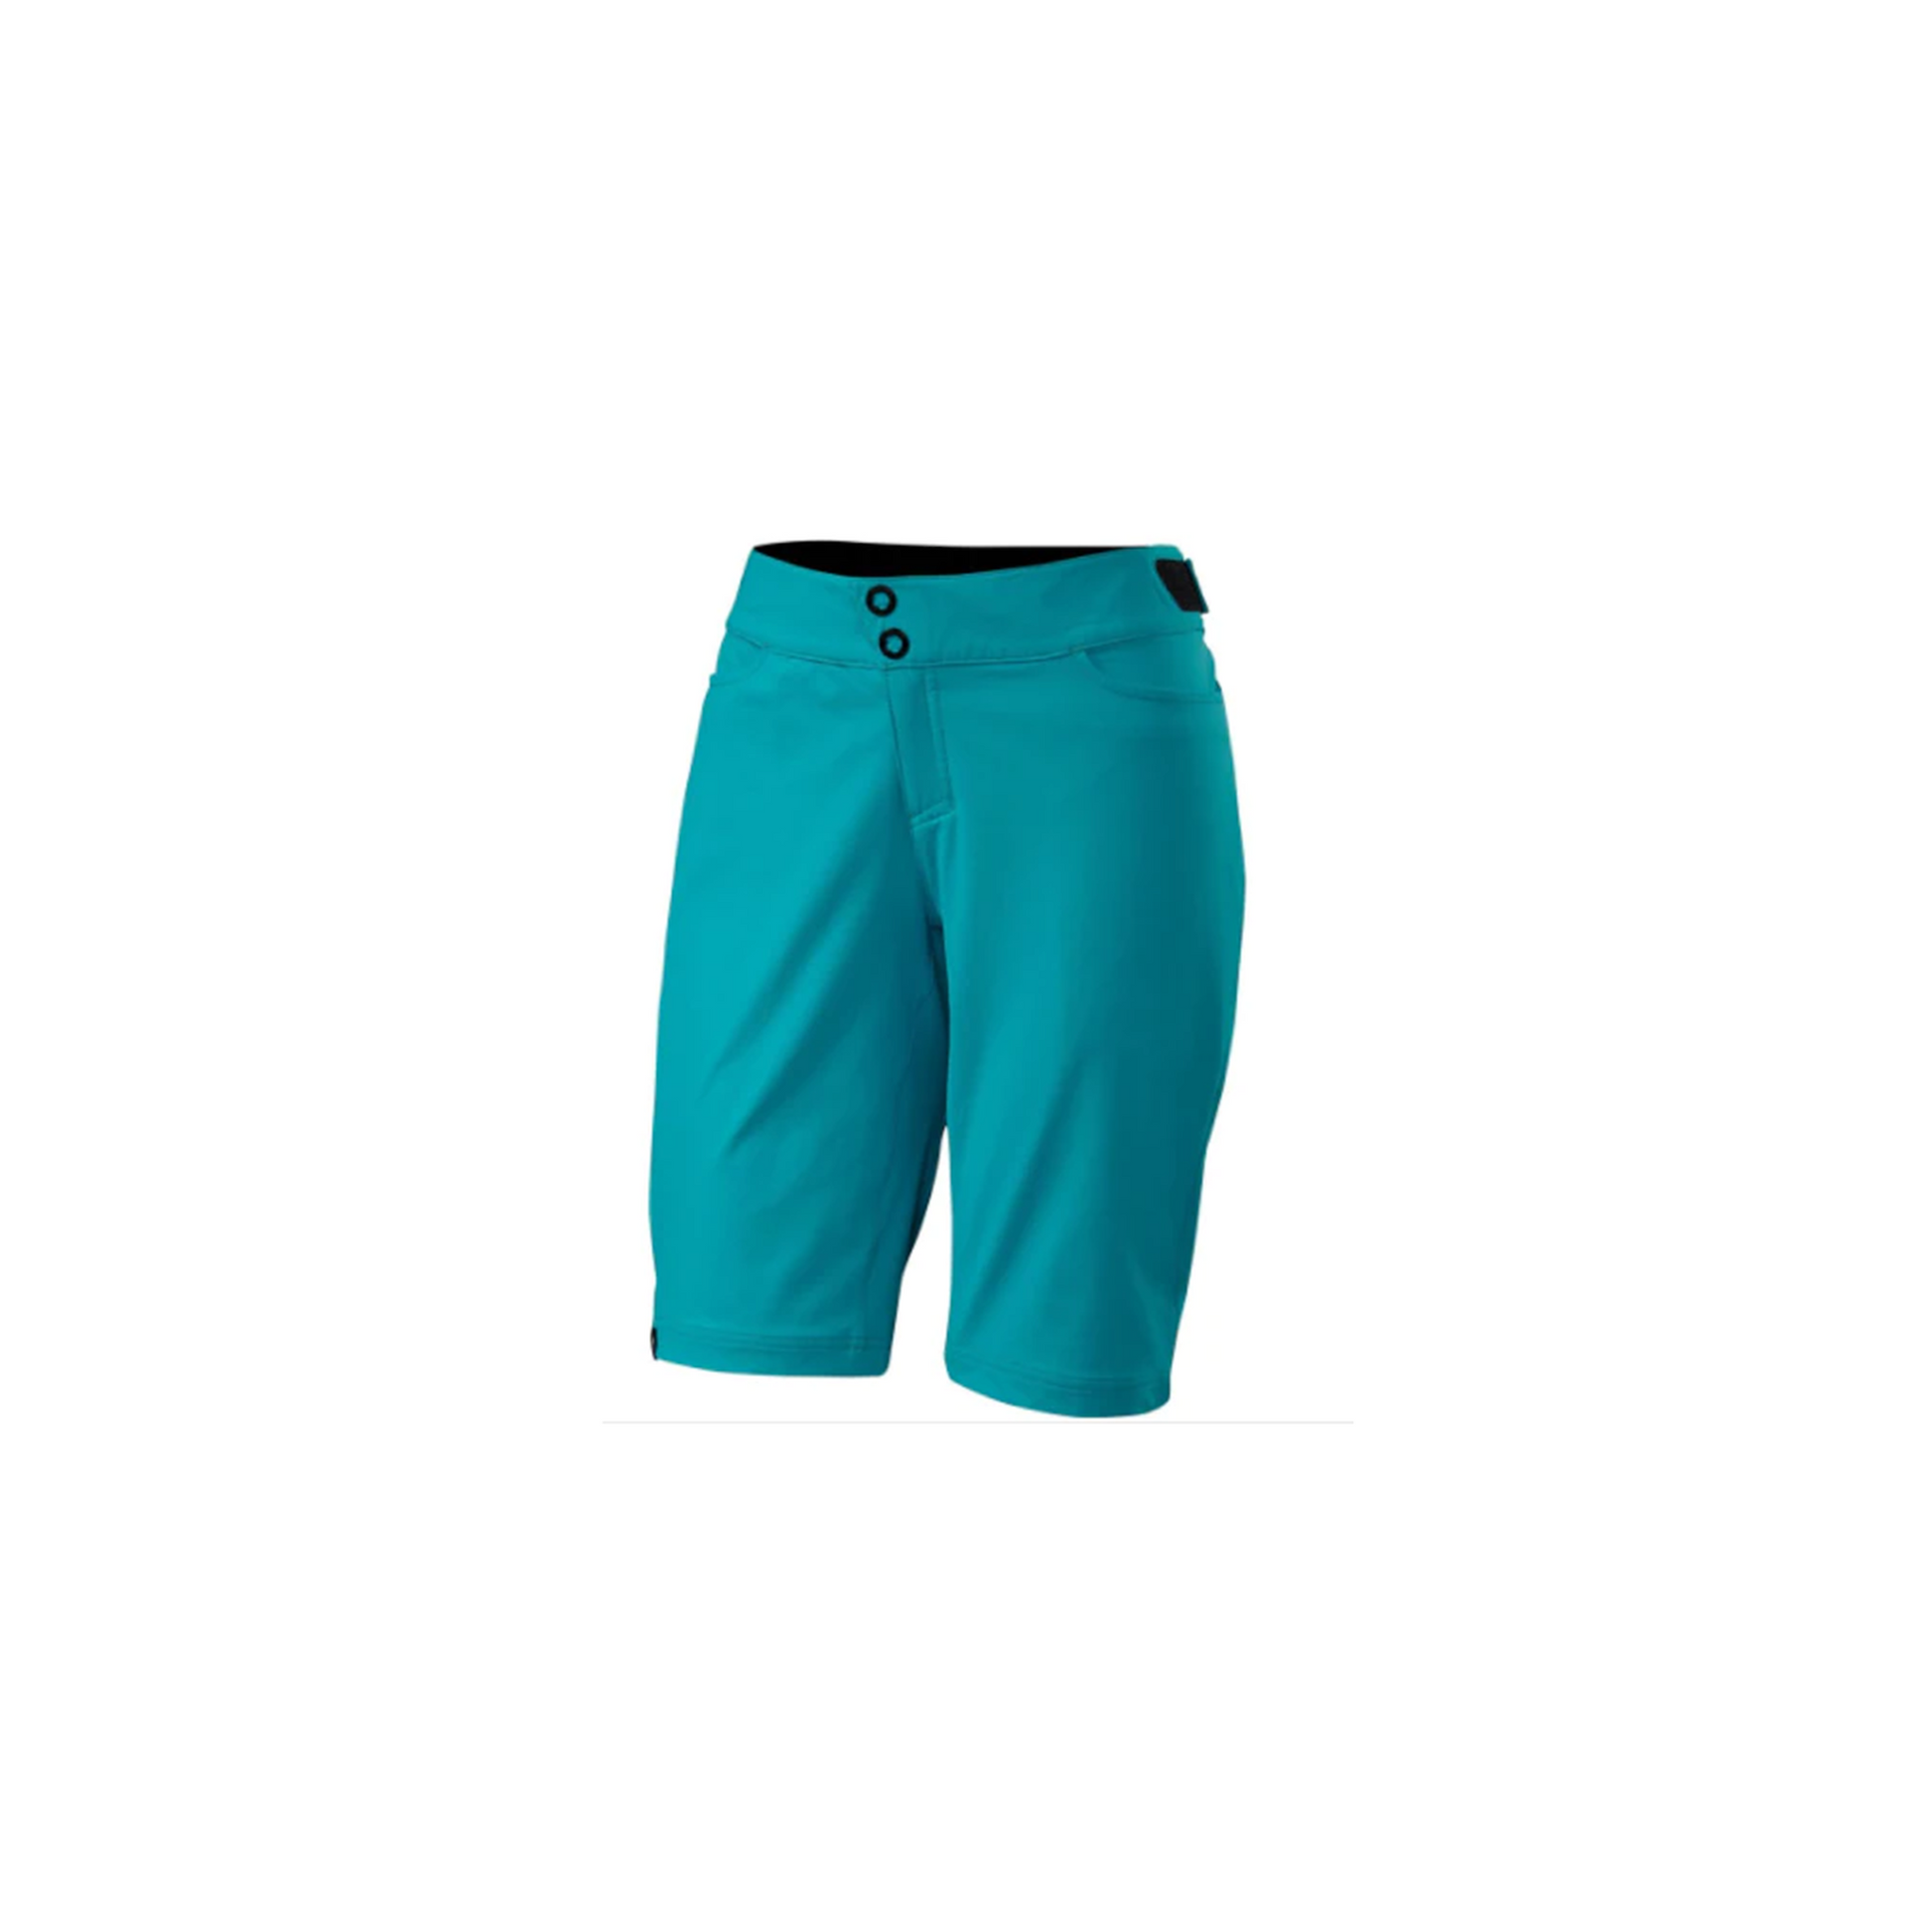 Women's Andorra Comp Short | Complete Cyclist - For a pair of mountain bike shorts to be functional, they not only need to be durable and lightweight, but they also need to be comfortable and stylish. And while we don't want to toot our own horn, our Andorra Comp Shorts have this all in spades. 